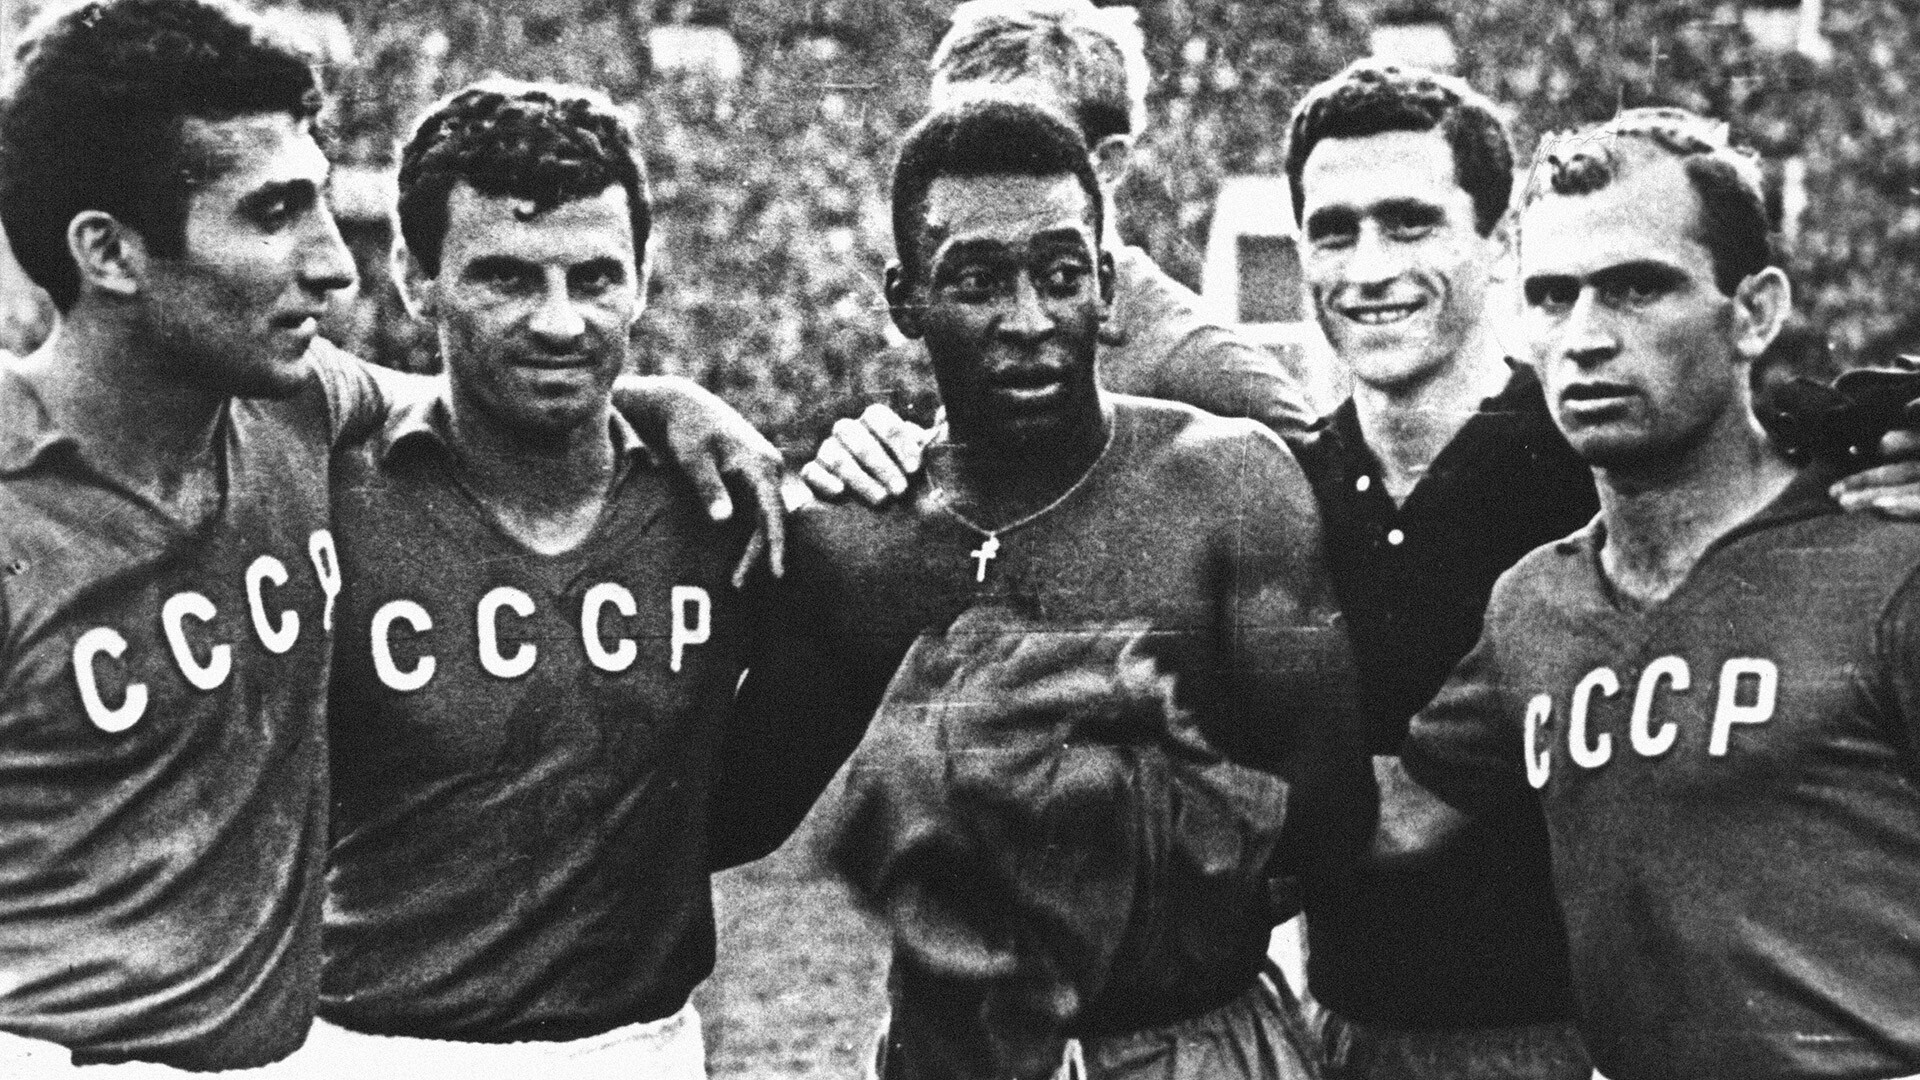 Pelé among the Soviet footballers after the friendly match in Moscow, 1965.